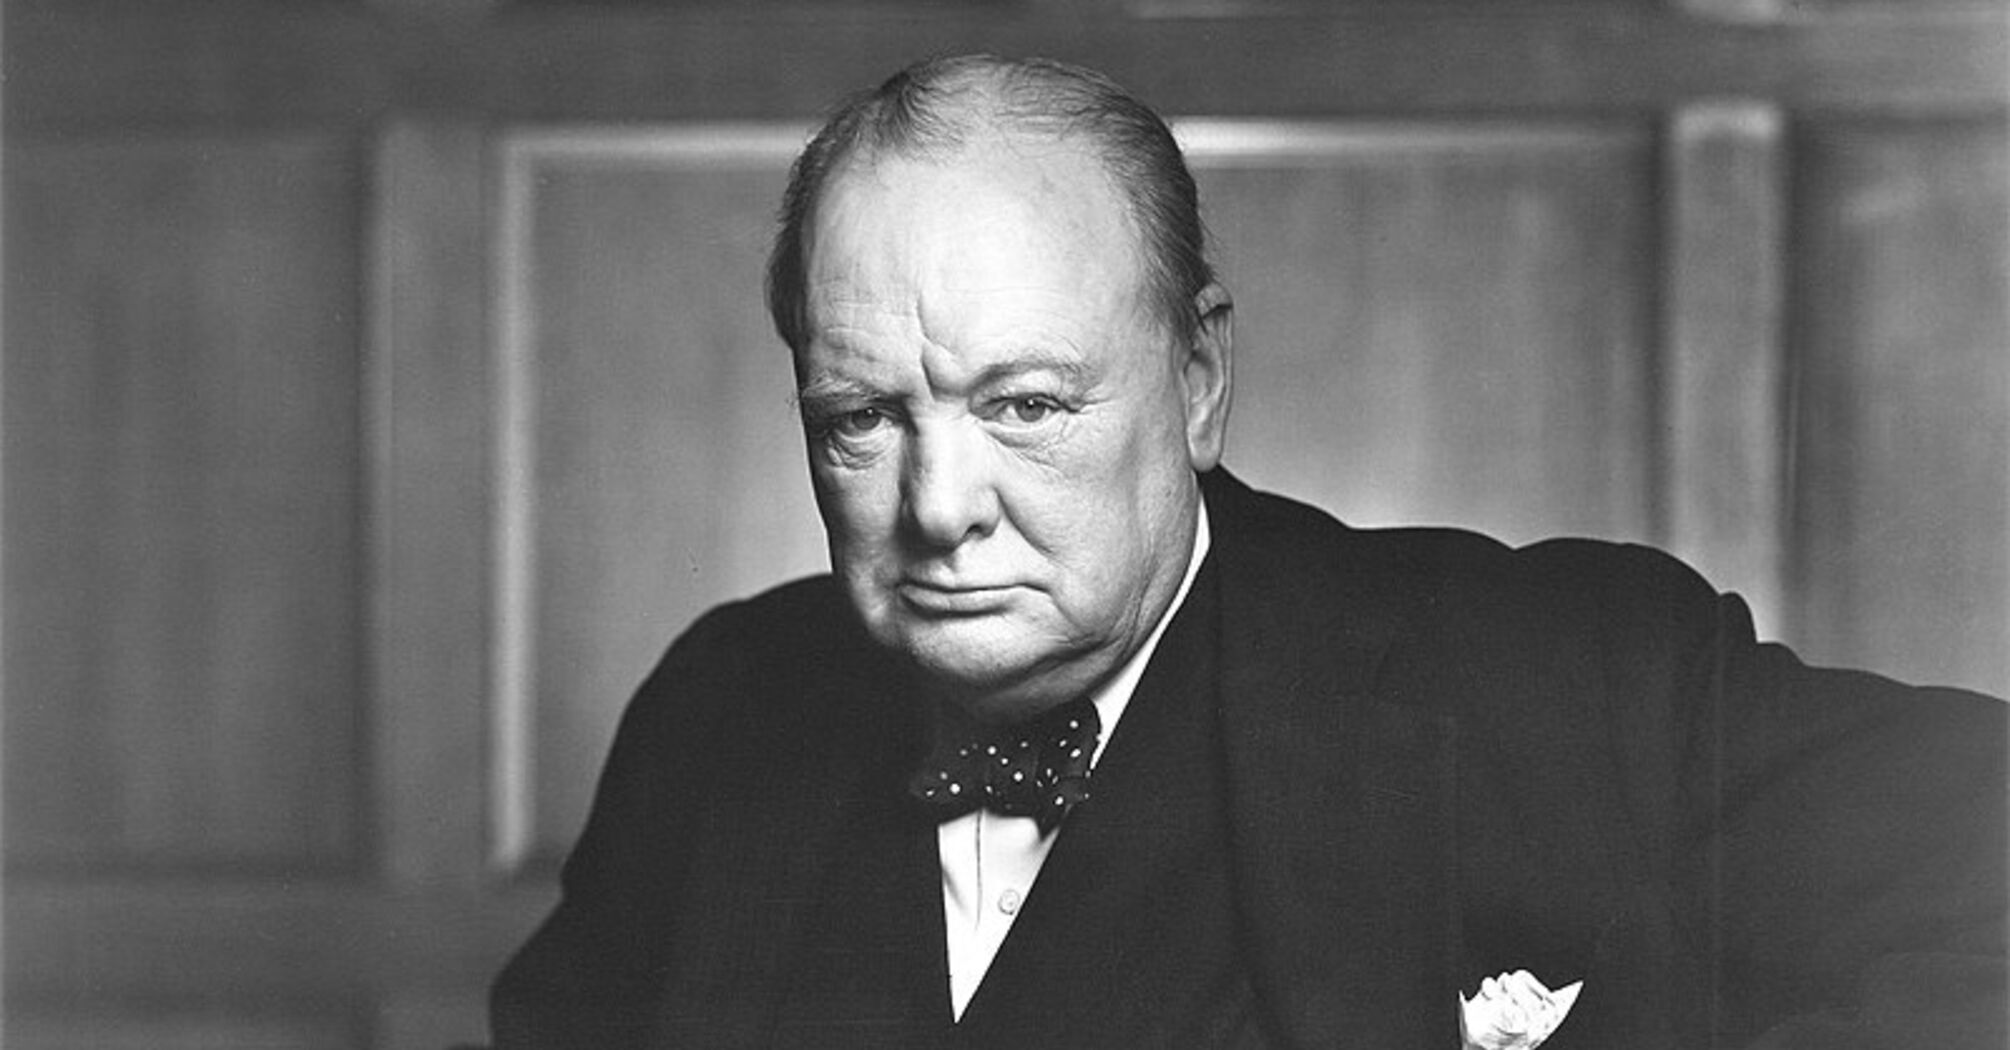 Winston Churchill tour: traveling in the footsteps of the British leader is gaining popularity